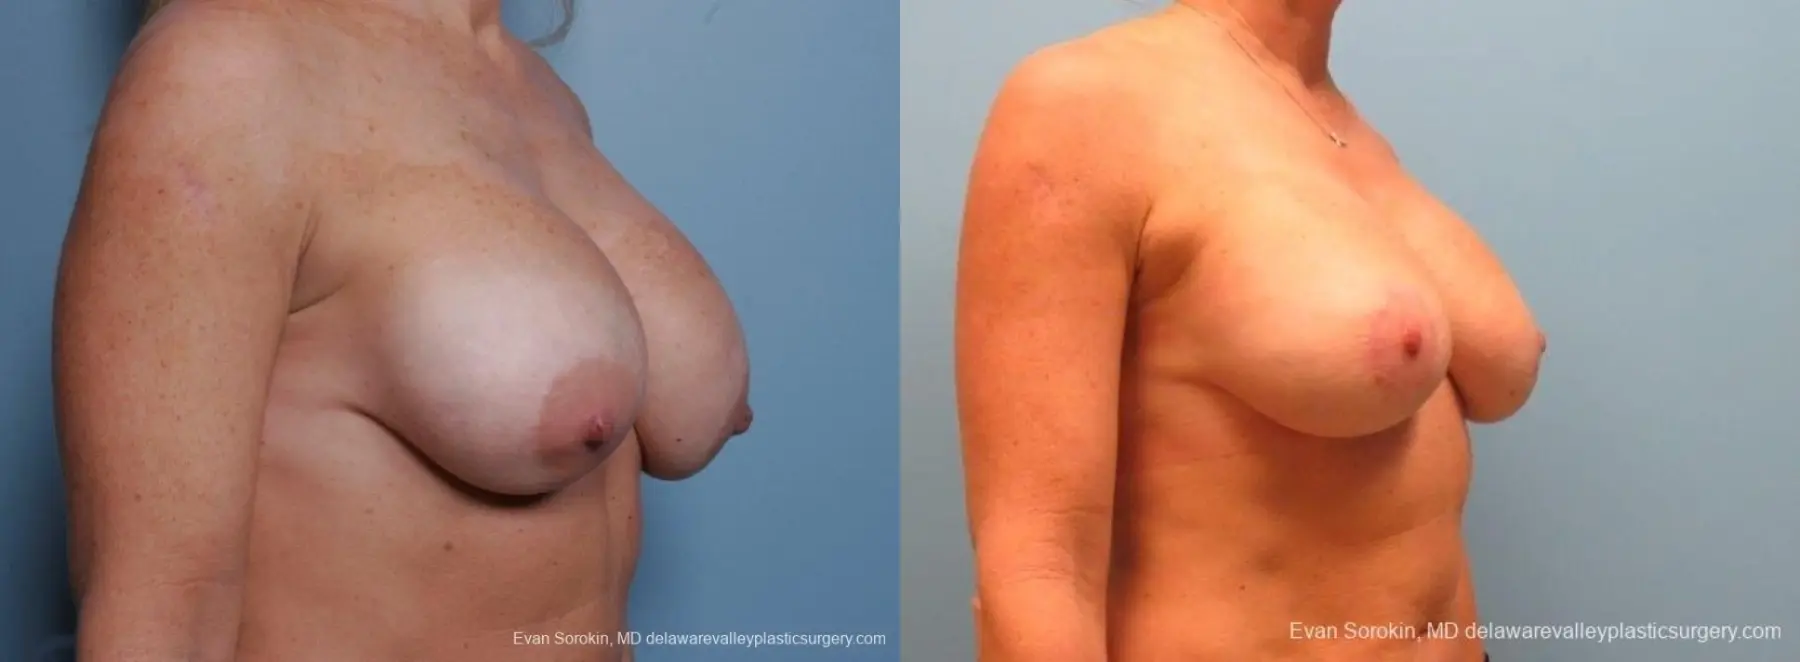 Philadelphia Breast Lift and Augmentation 8690 - Before and After 2